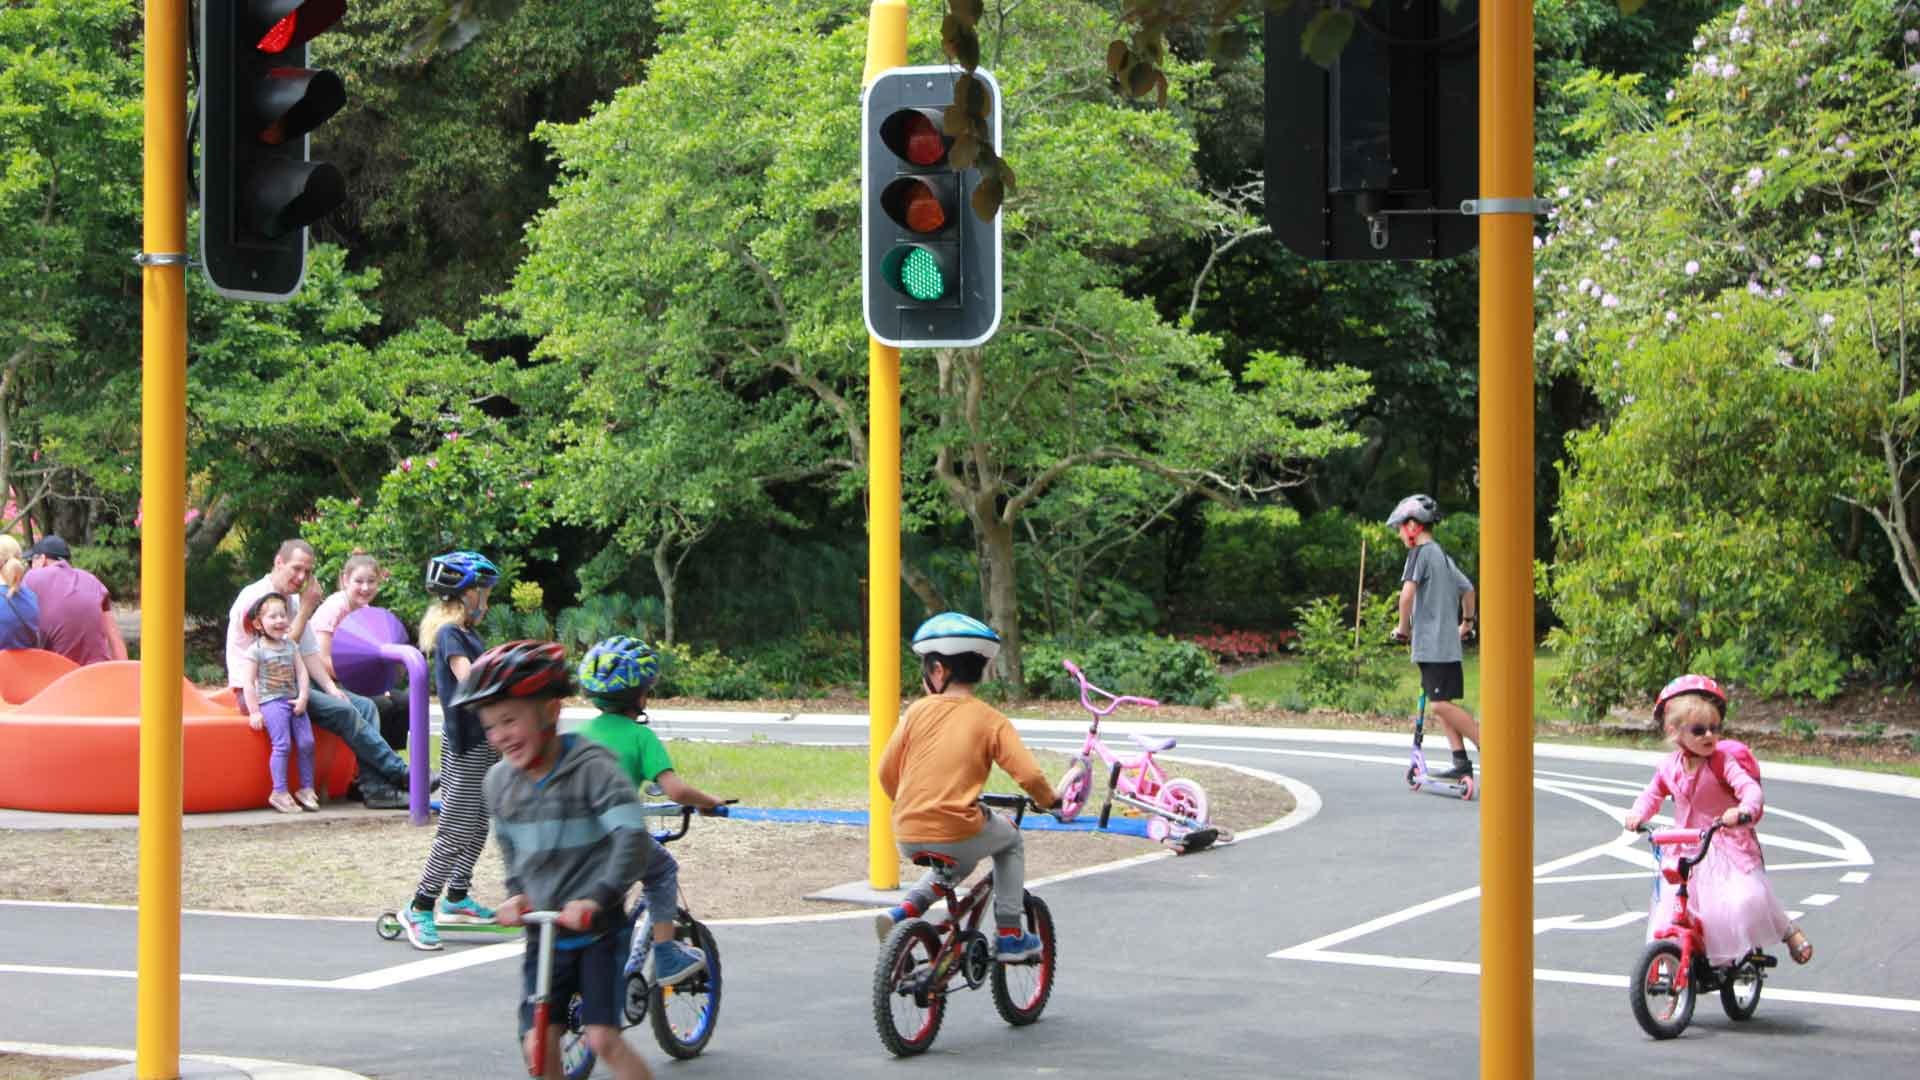 Photo shows gleeful kids on bikes in the road safety park.